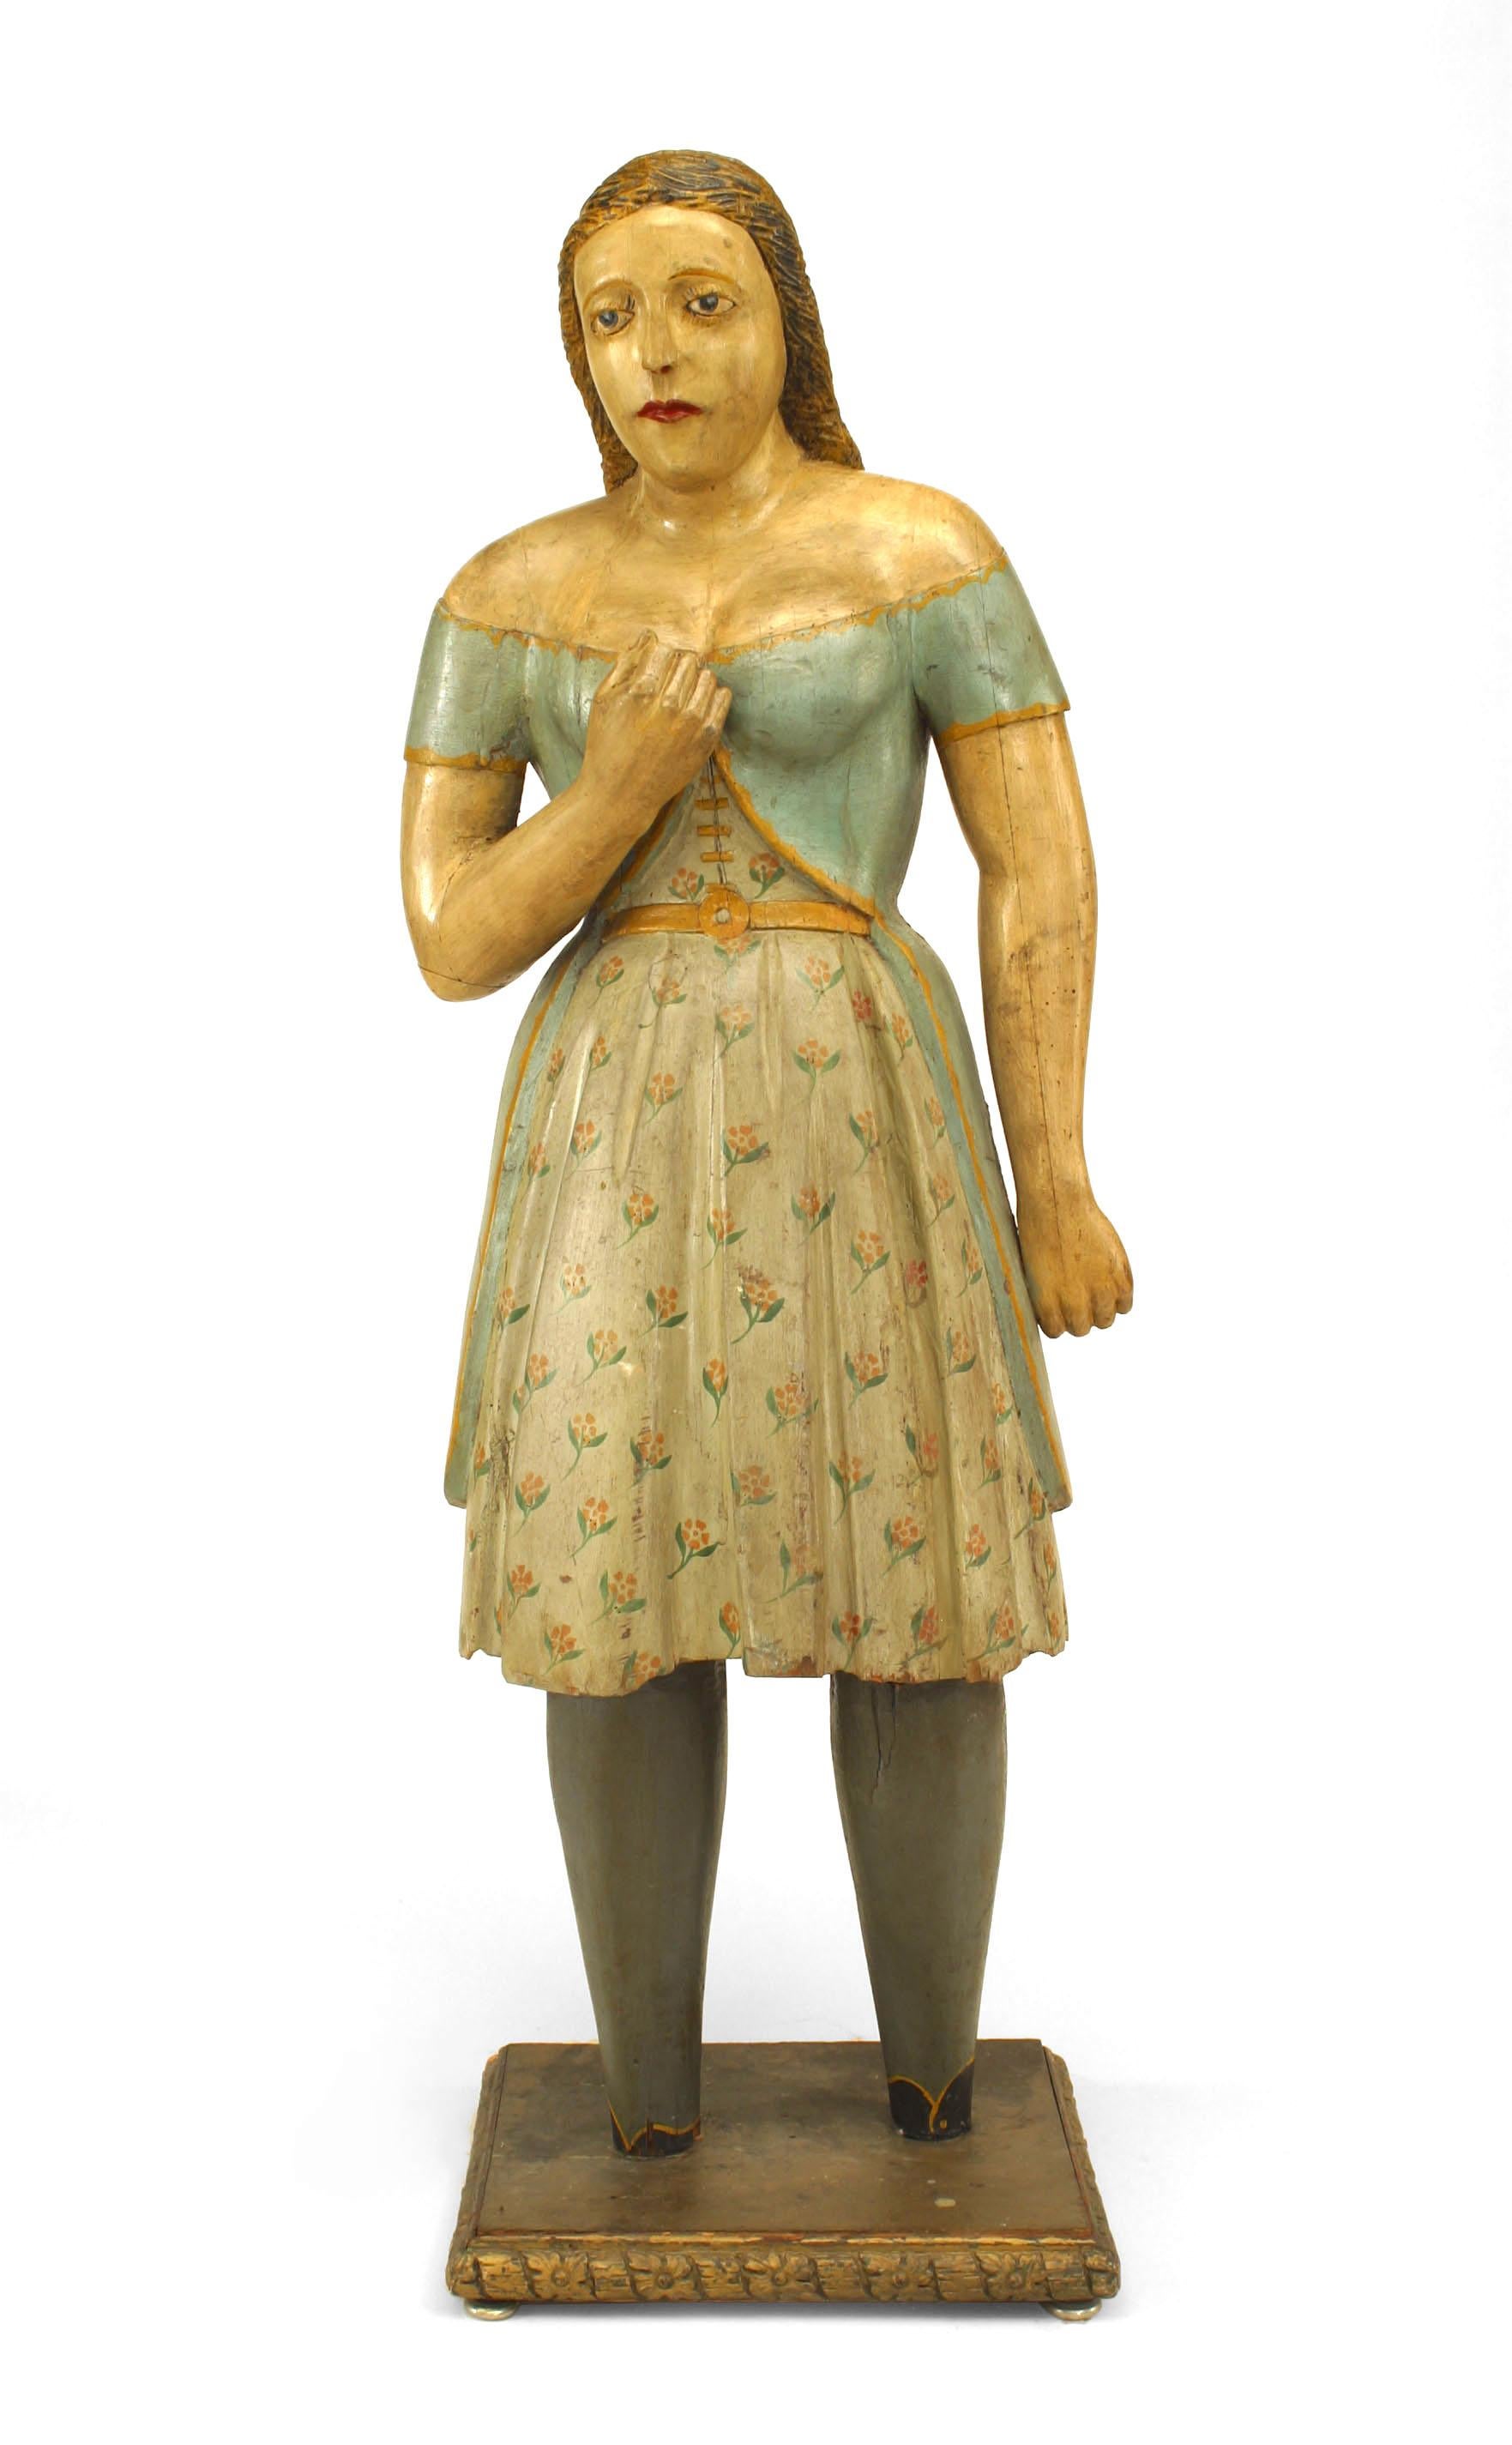 American Country style life size wood figure of young girl with light blue and floral decorated dress. (19th Cent.)
